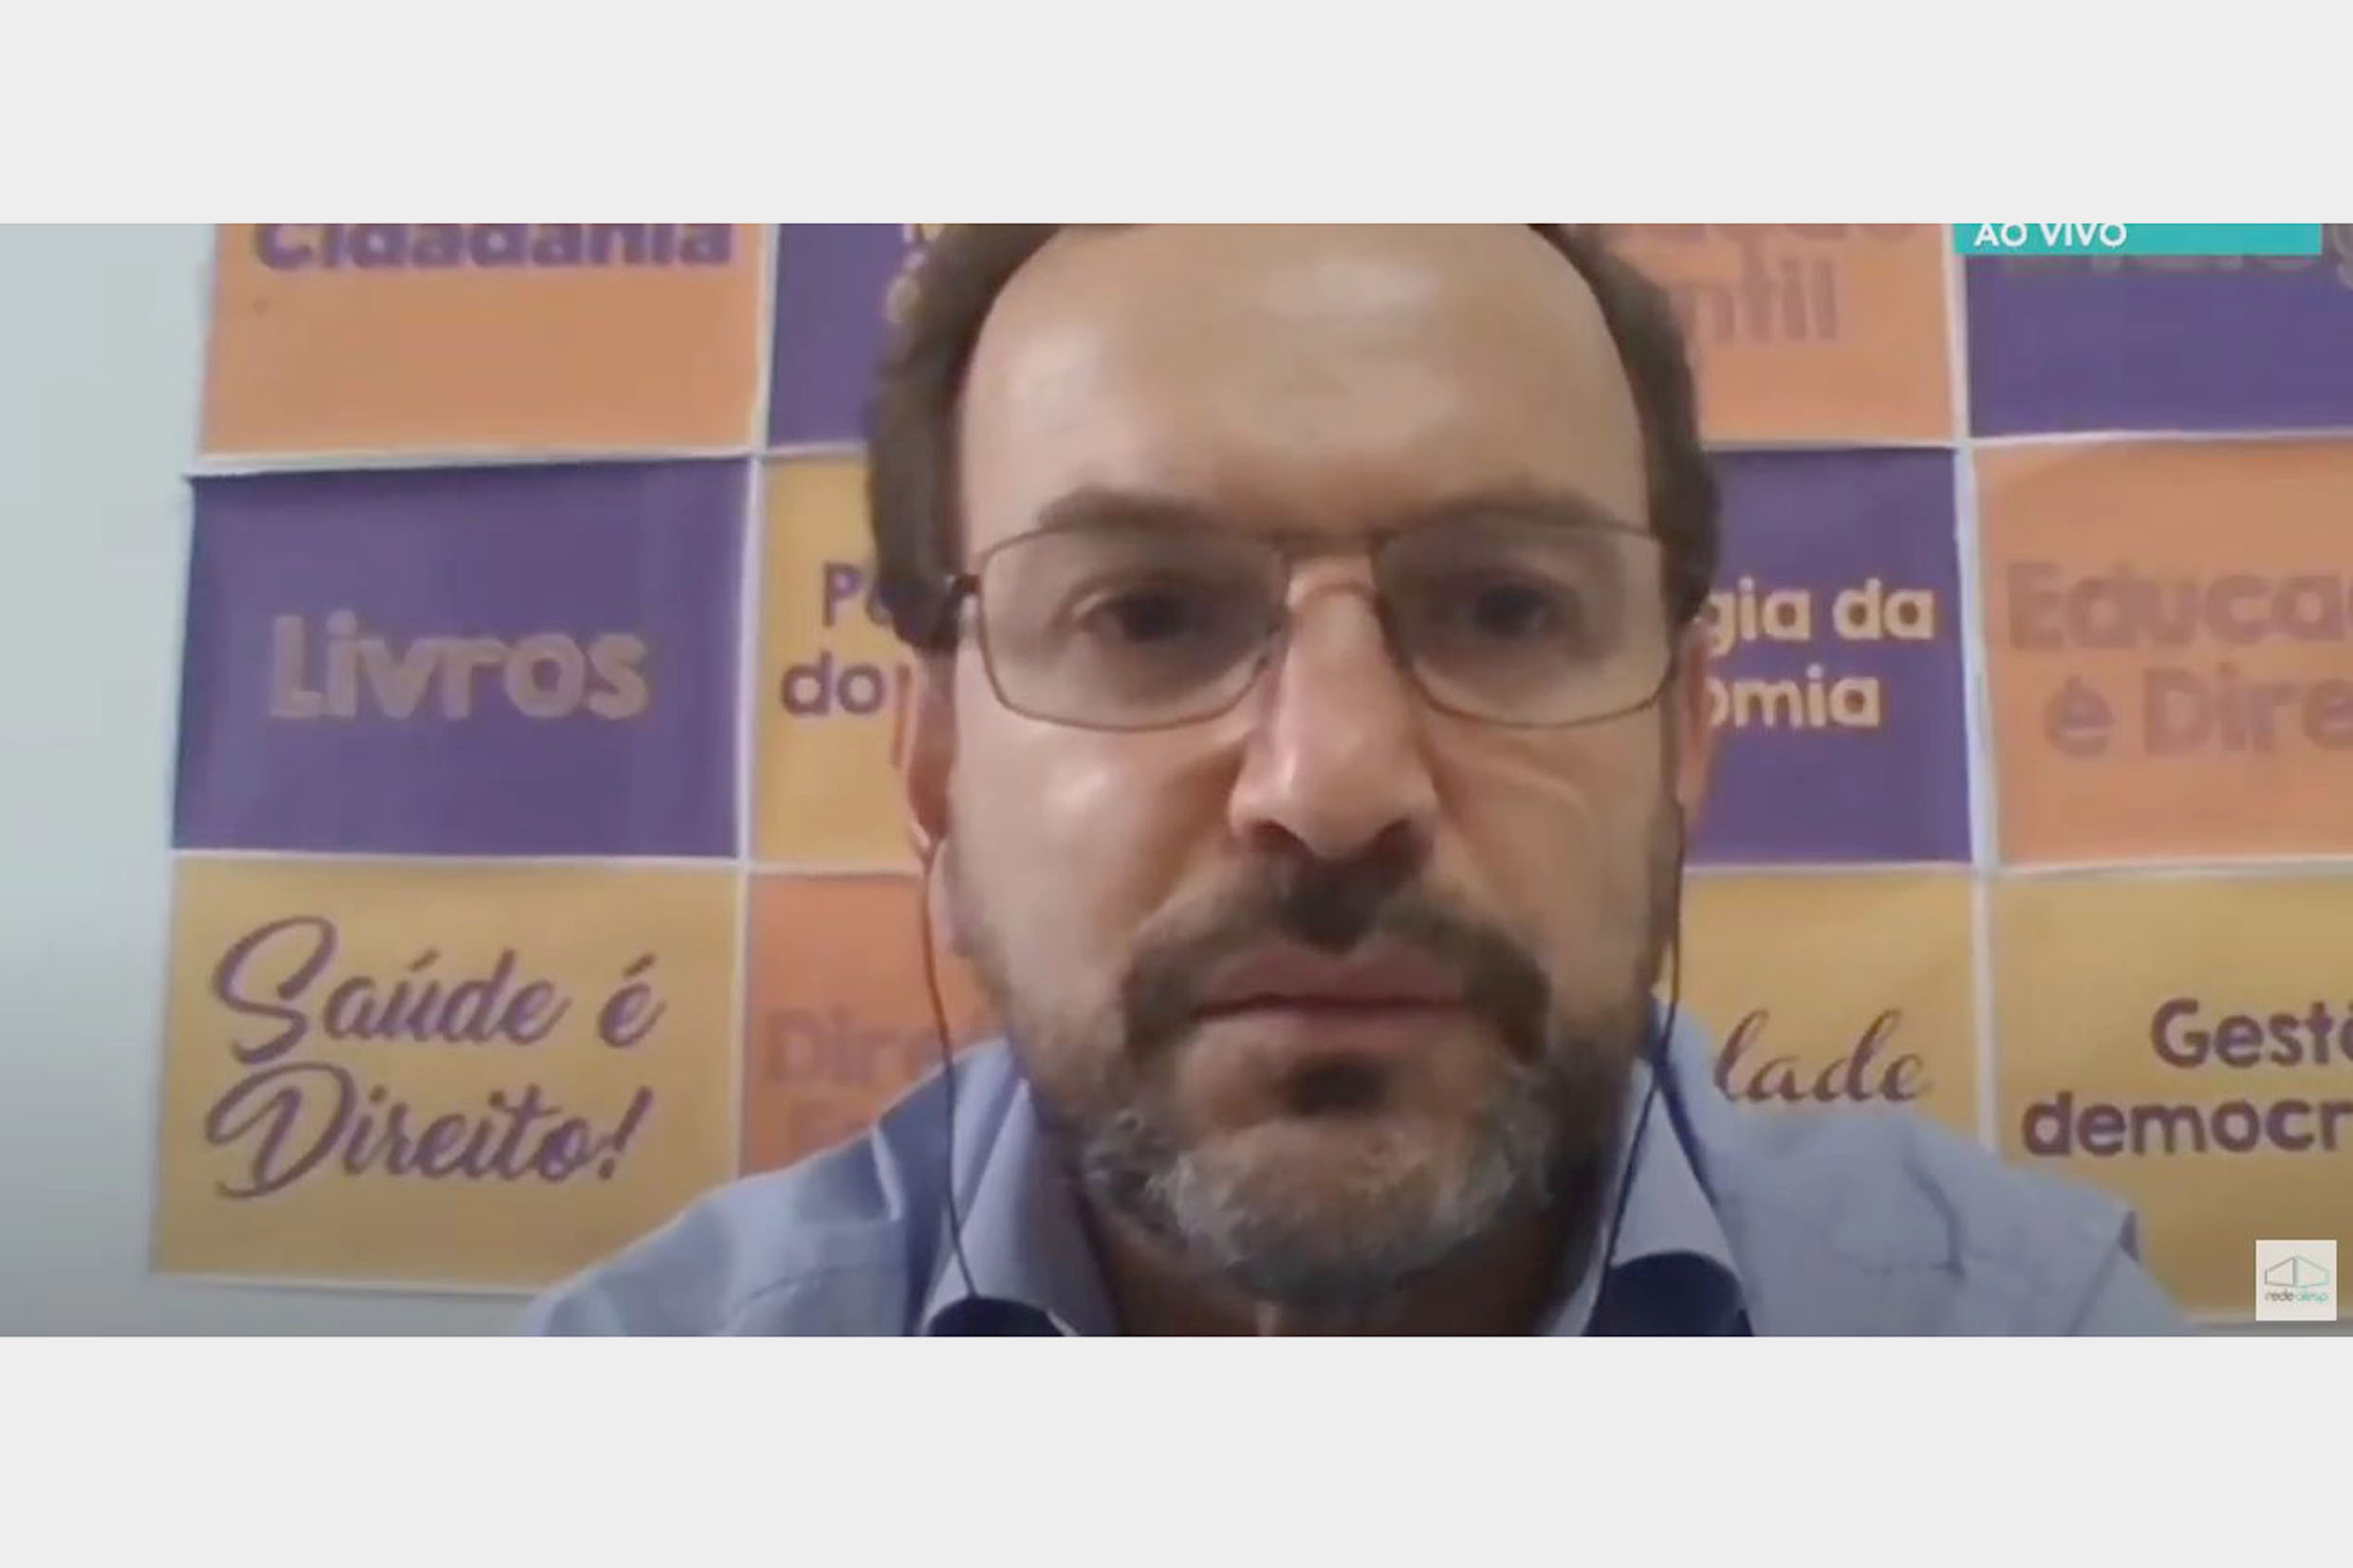 Celso Giannazi<a style='float:right;color:#ccc' href='https://www3.al.sp.gov.br/repositorio/noticia/N-11-2020/fg257291.jpg' target=_blank><i class='bi bi-zoom-in'></i> Clique para ver a imagem </a>